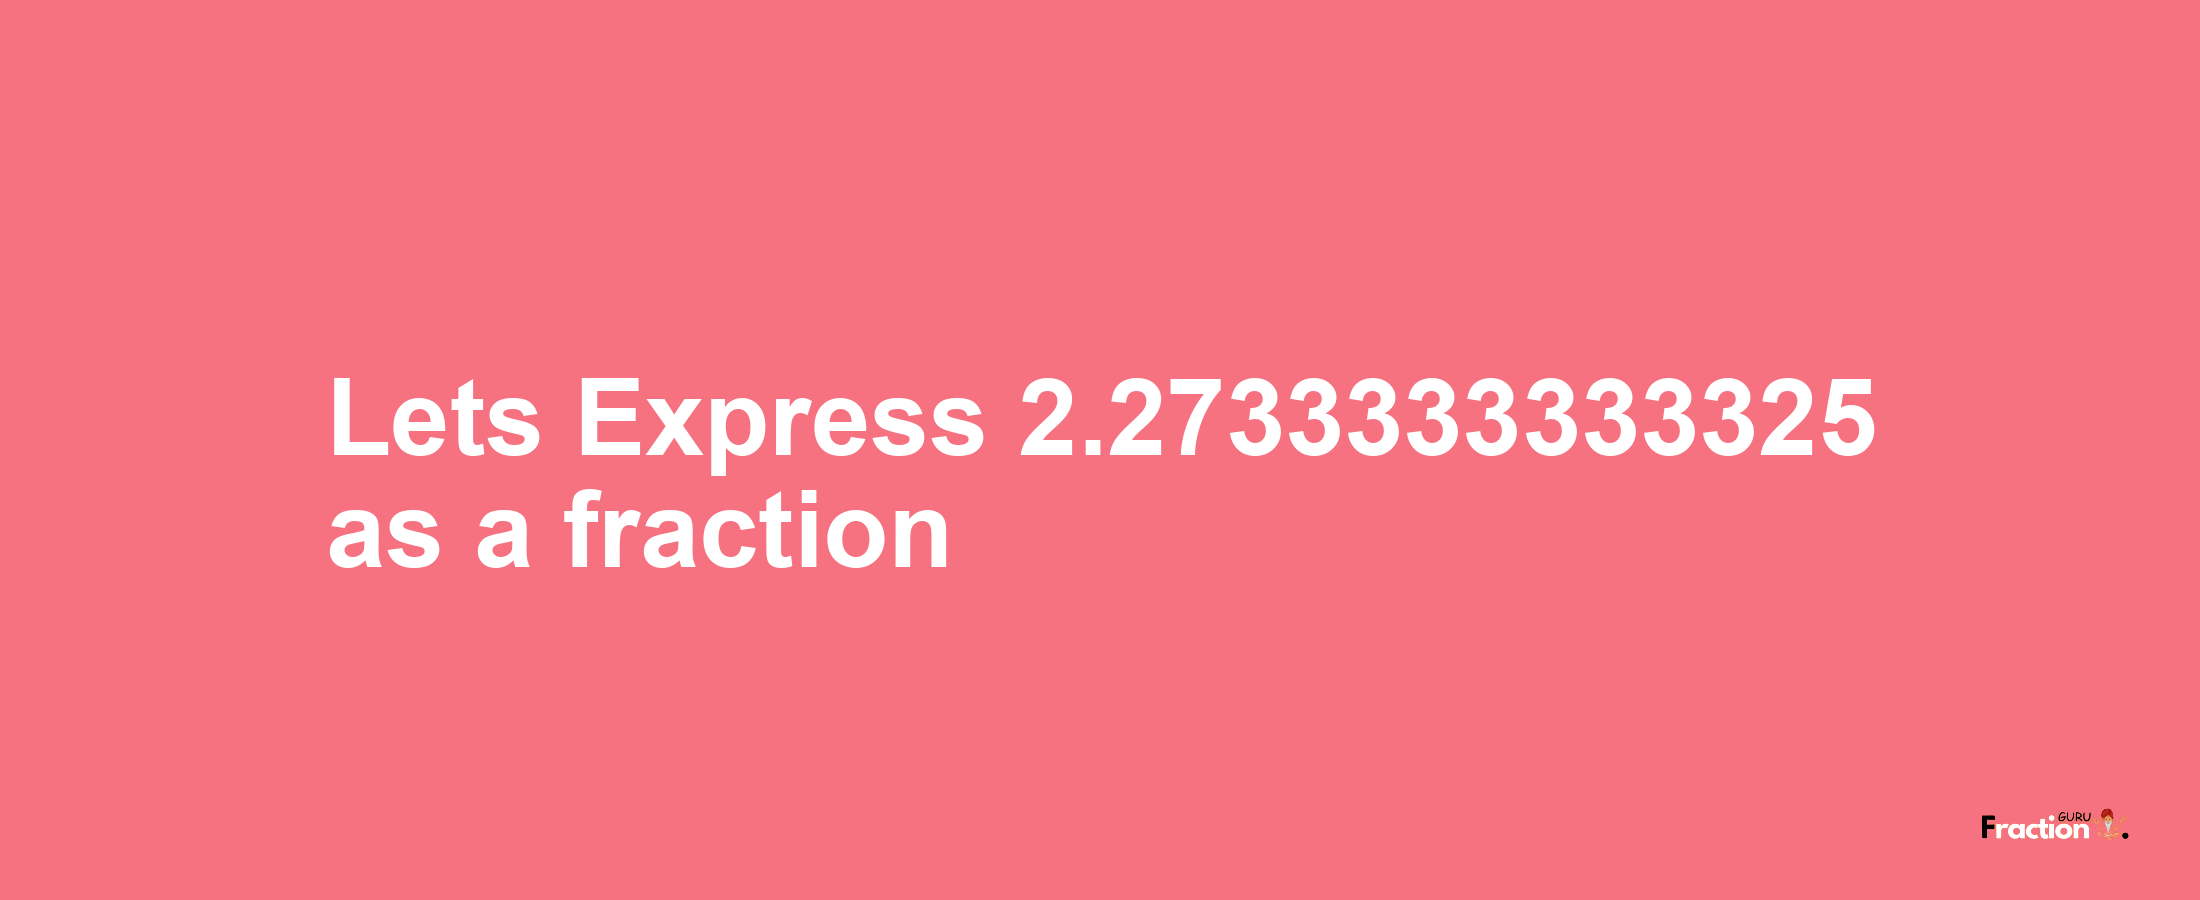 Lets Express 2.2733333333325 as afraction